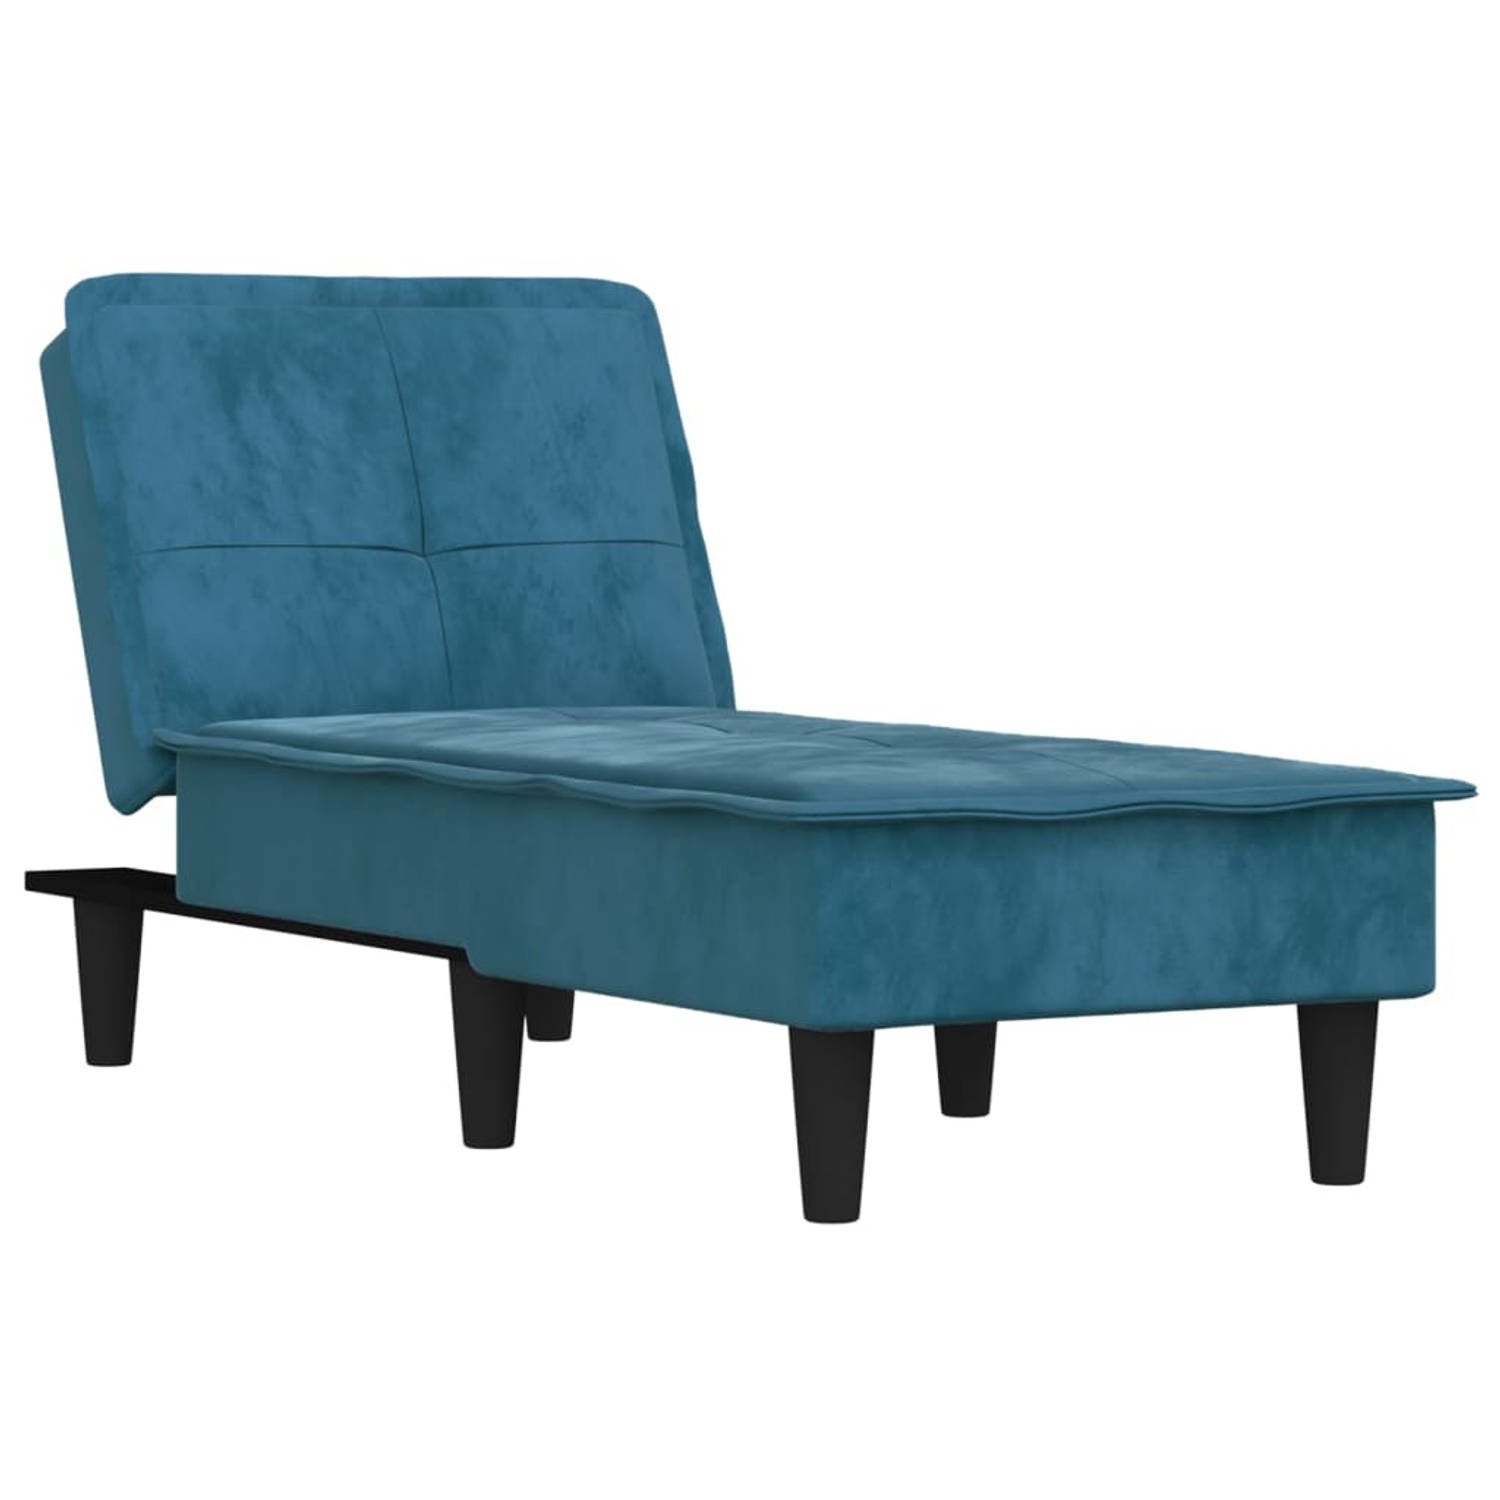 The Living Store Chaise longue fluweel blauw - Chaise longue